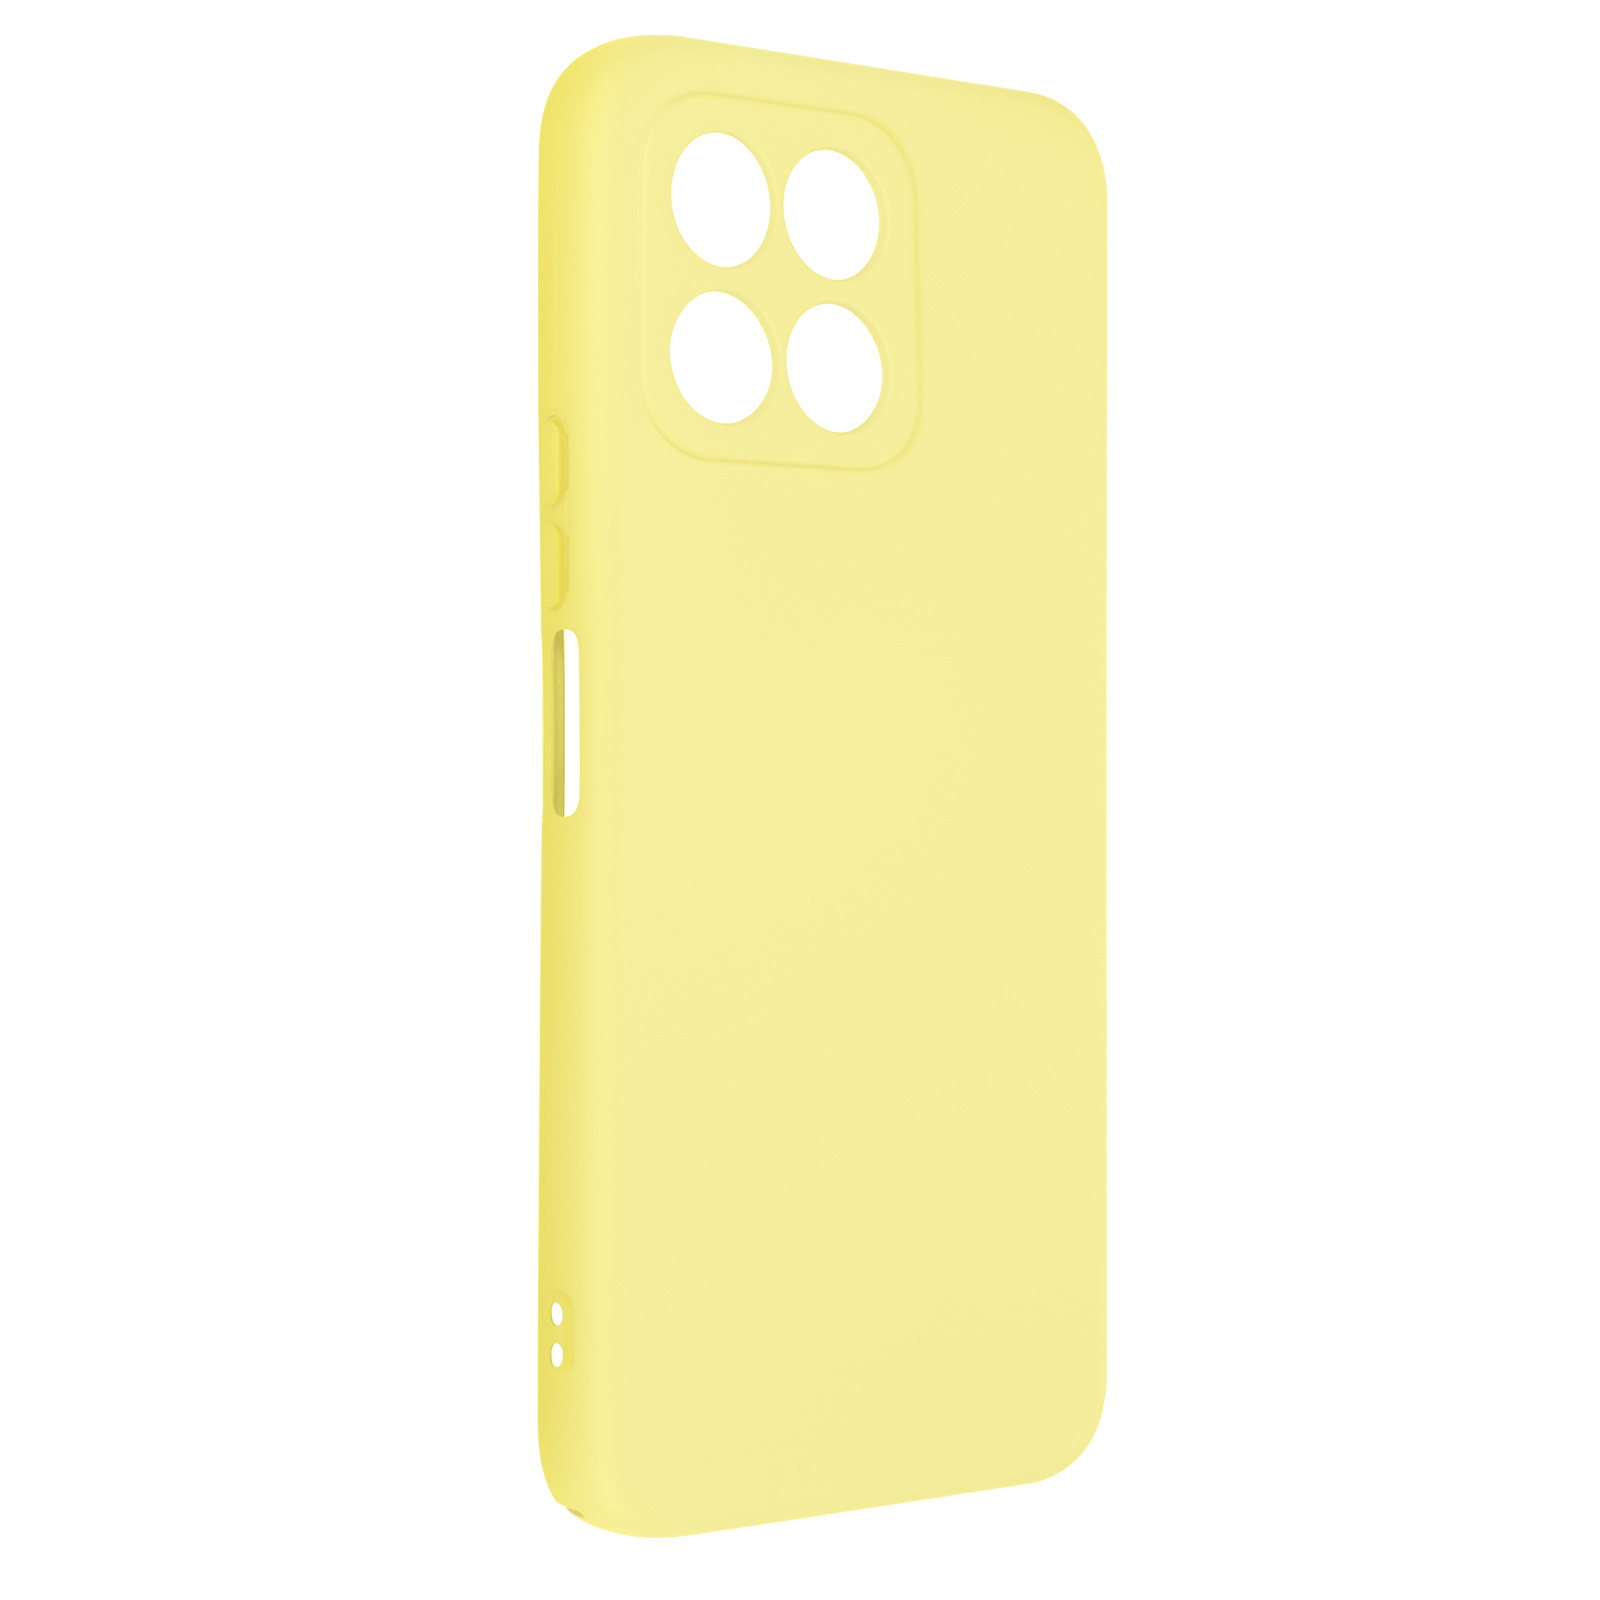 70 Soft Gelb Backcover, Series, Honor, Lite, Touch AVIZAR